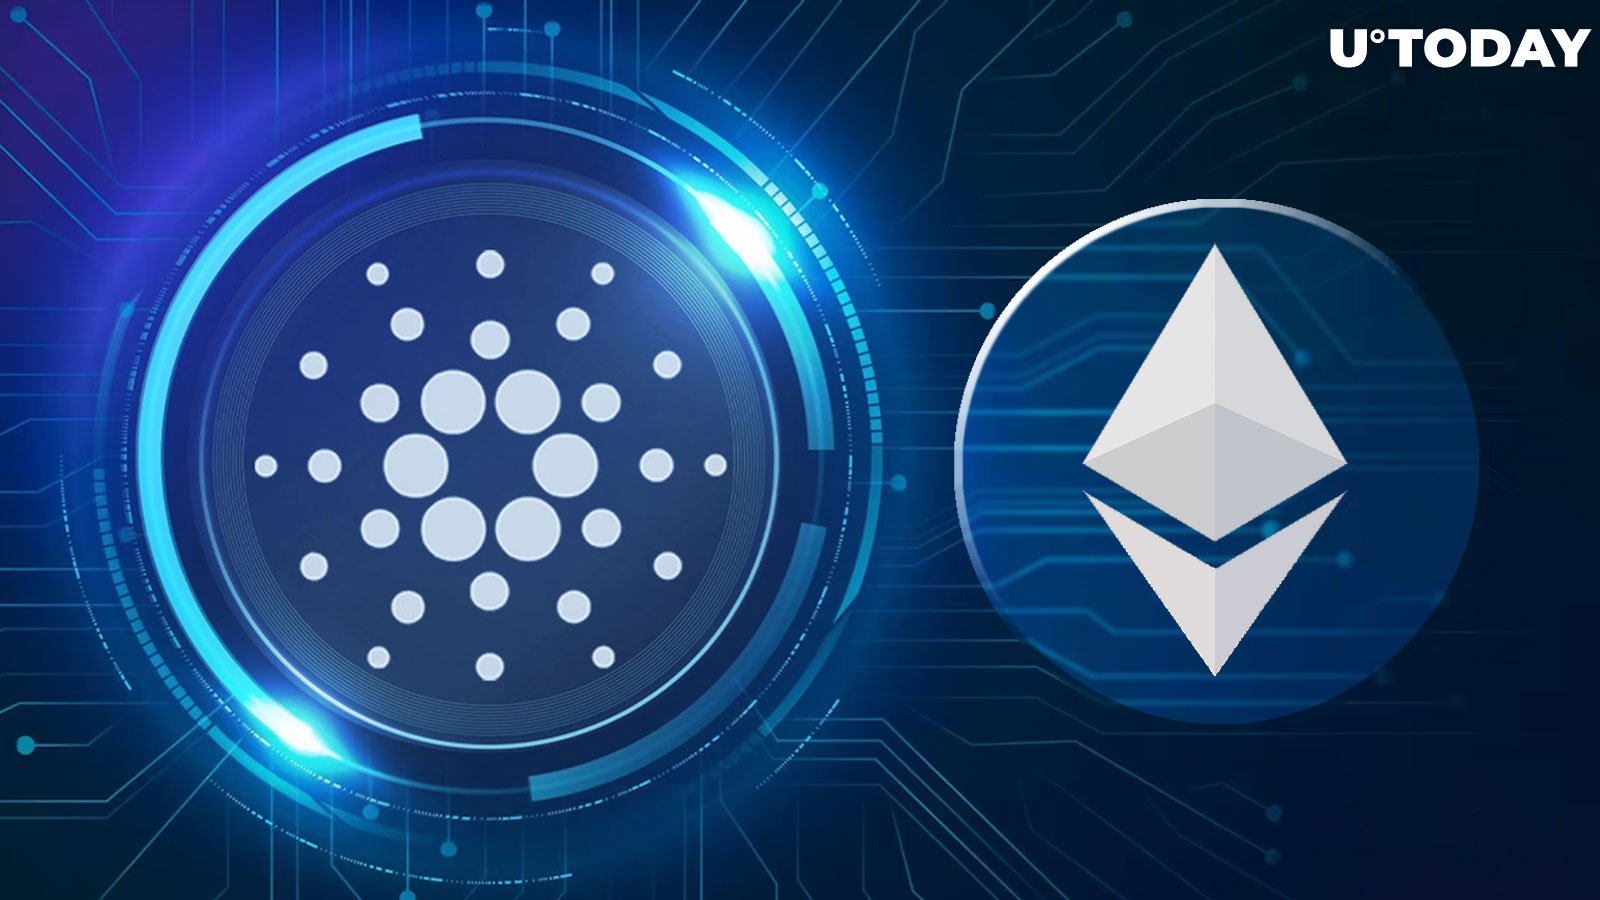 Cardano (ADA) to Become Largest EVM Chain Thanks to This Killer Innovation